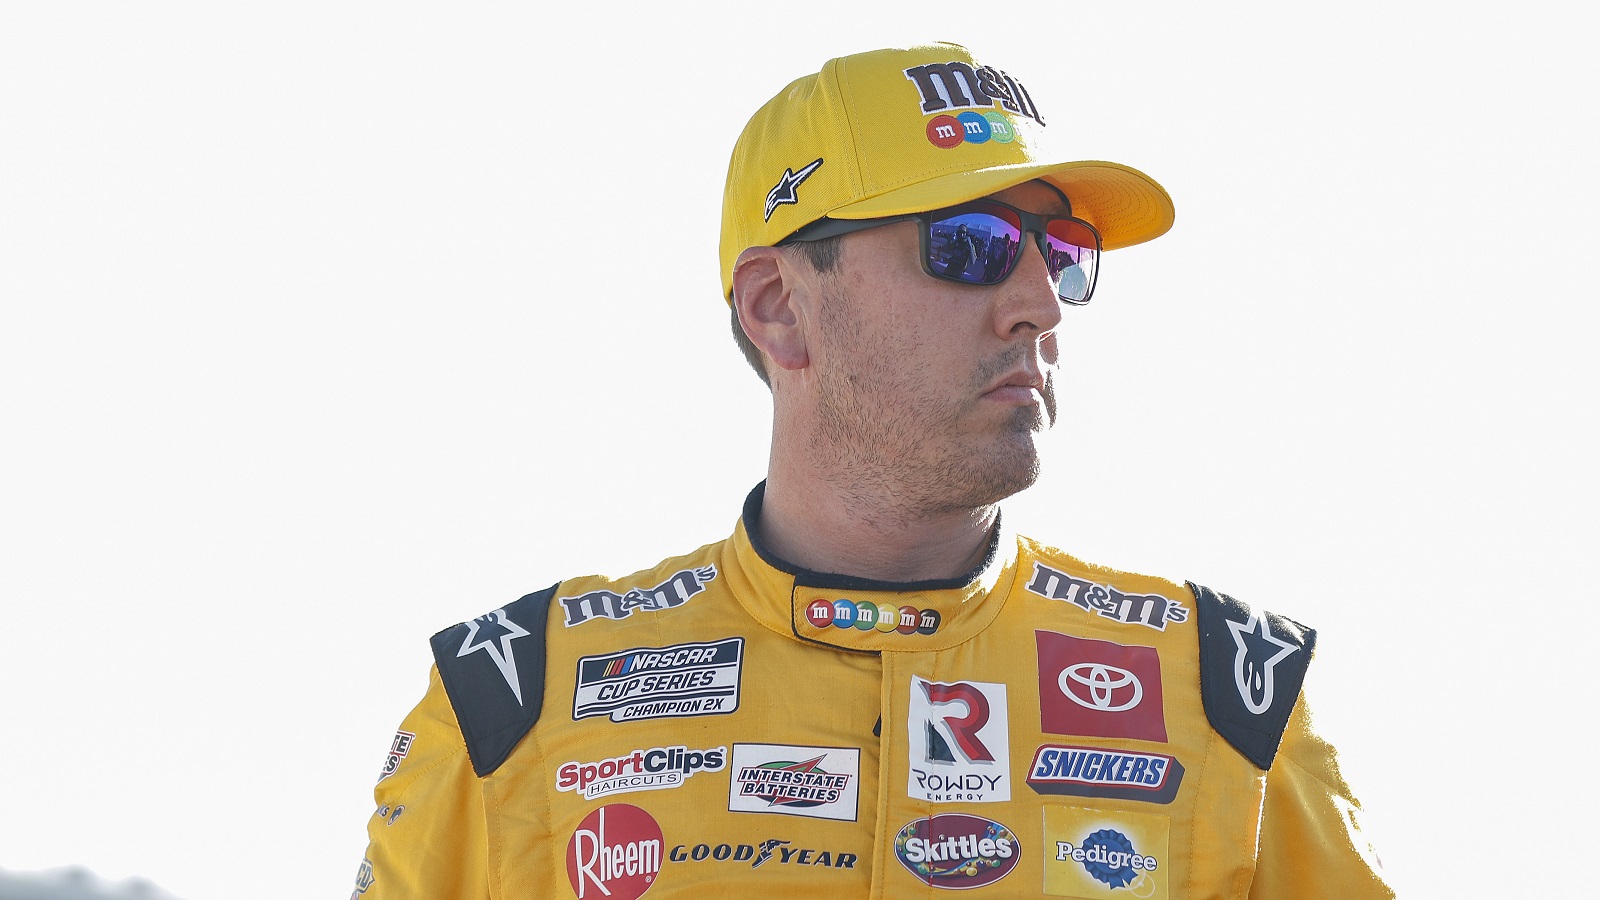 Kyle Busch waits on the grid during practice for the NASCAR Camping World Truck Series Worldwide Express 250 for Carrier Appreciation at Richmond Raceway on Aug. 13, 2022, in Richmond, Virginia.